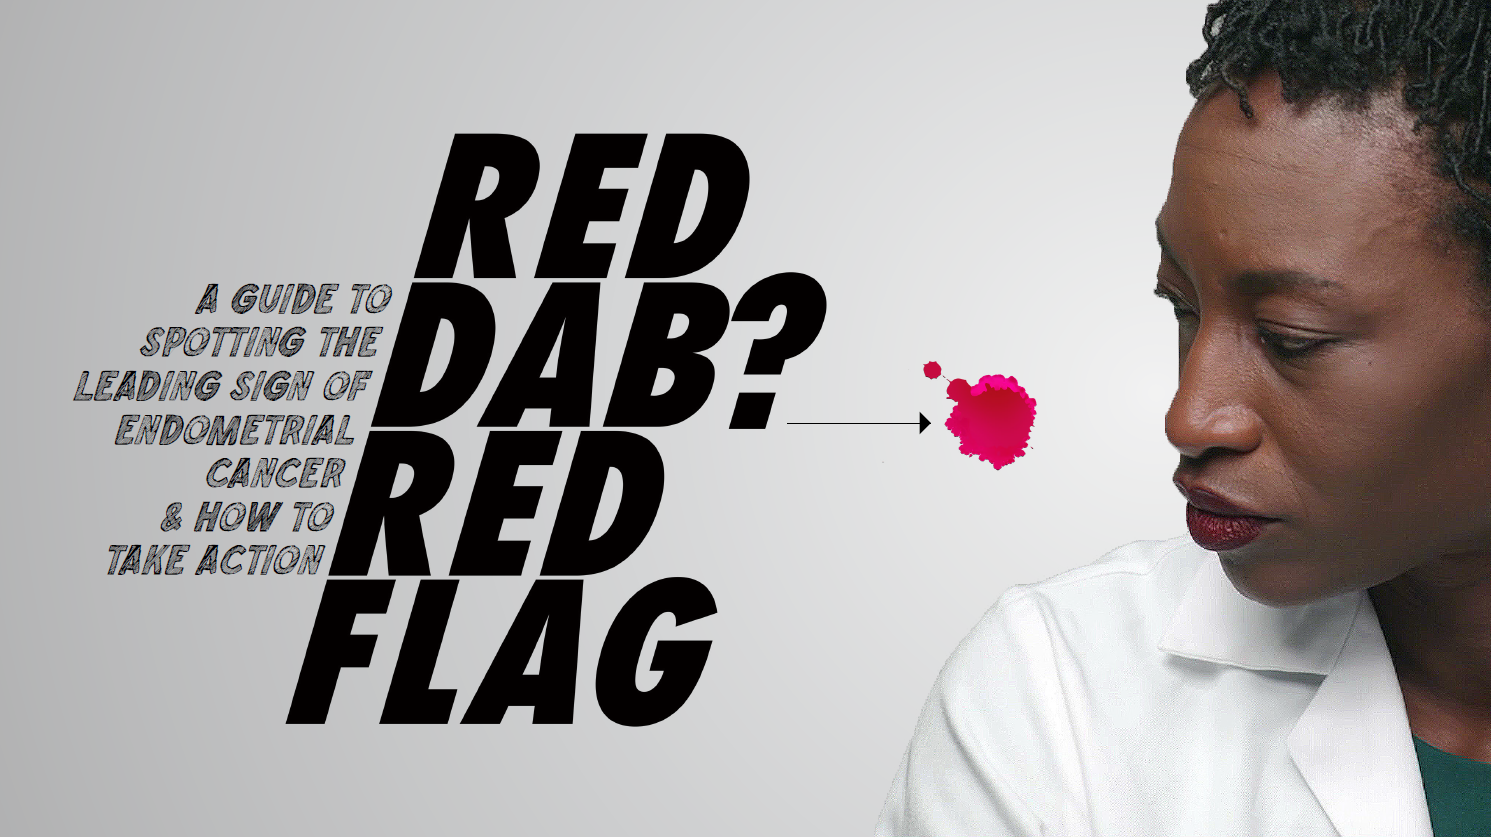 Black doctor looking at red dab red flag logo.